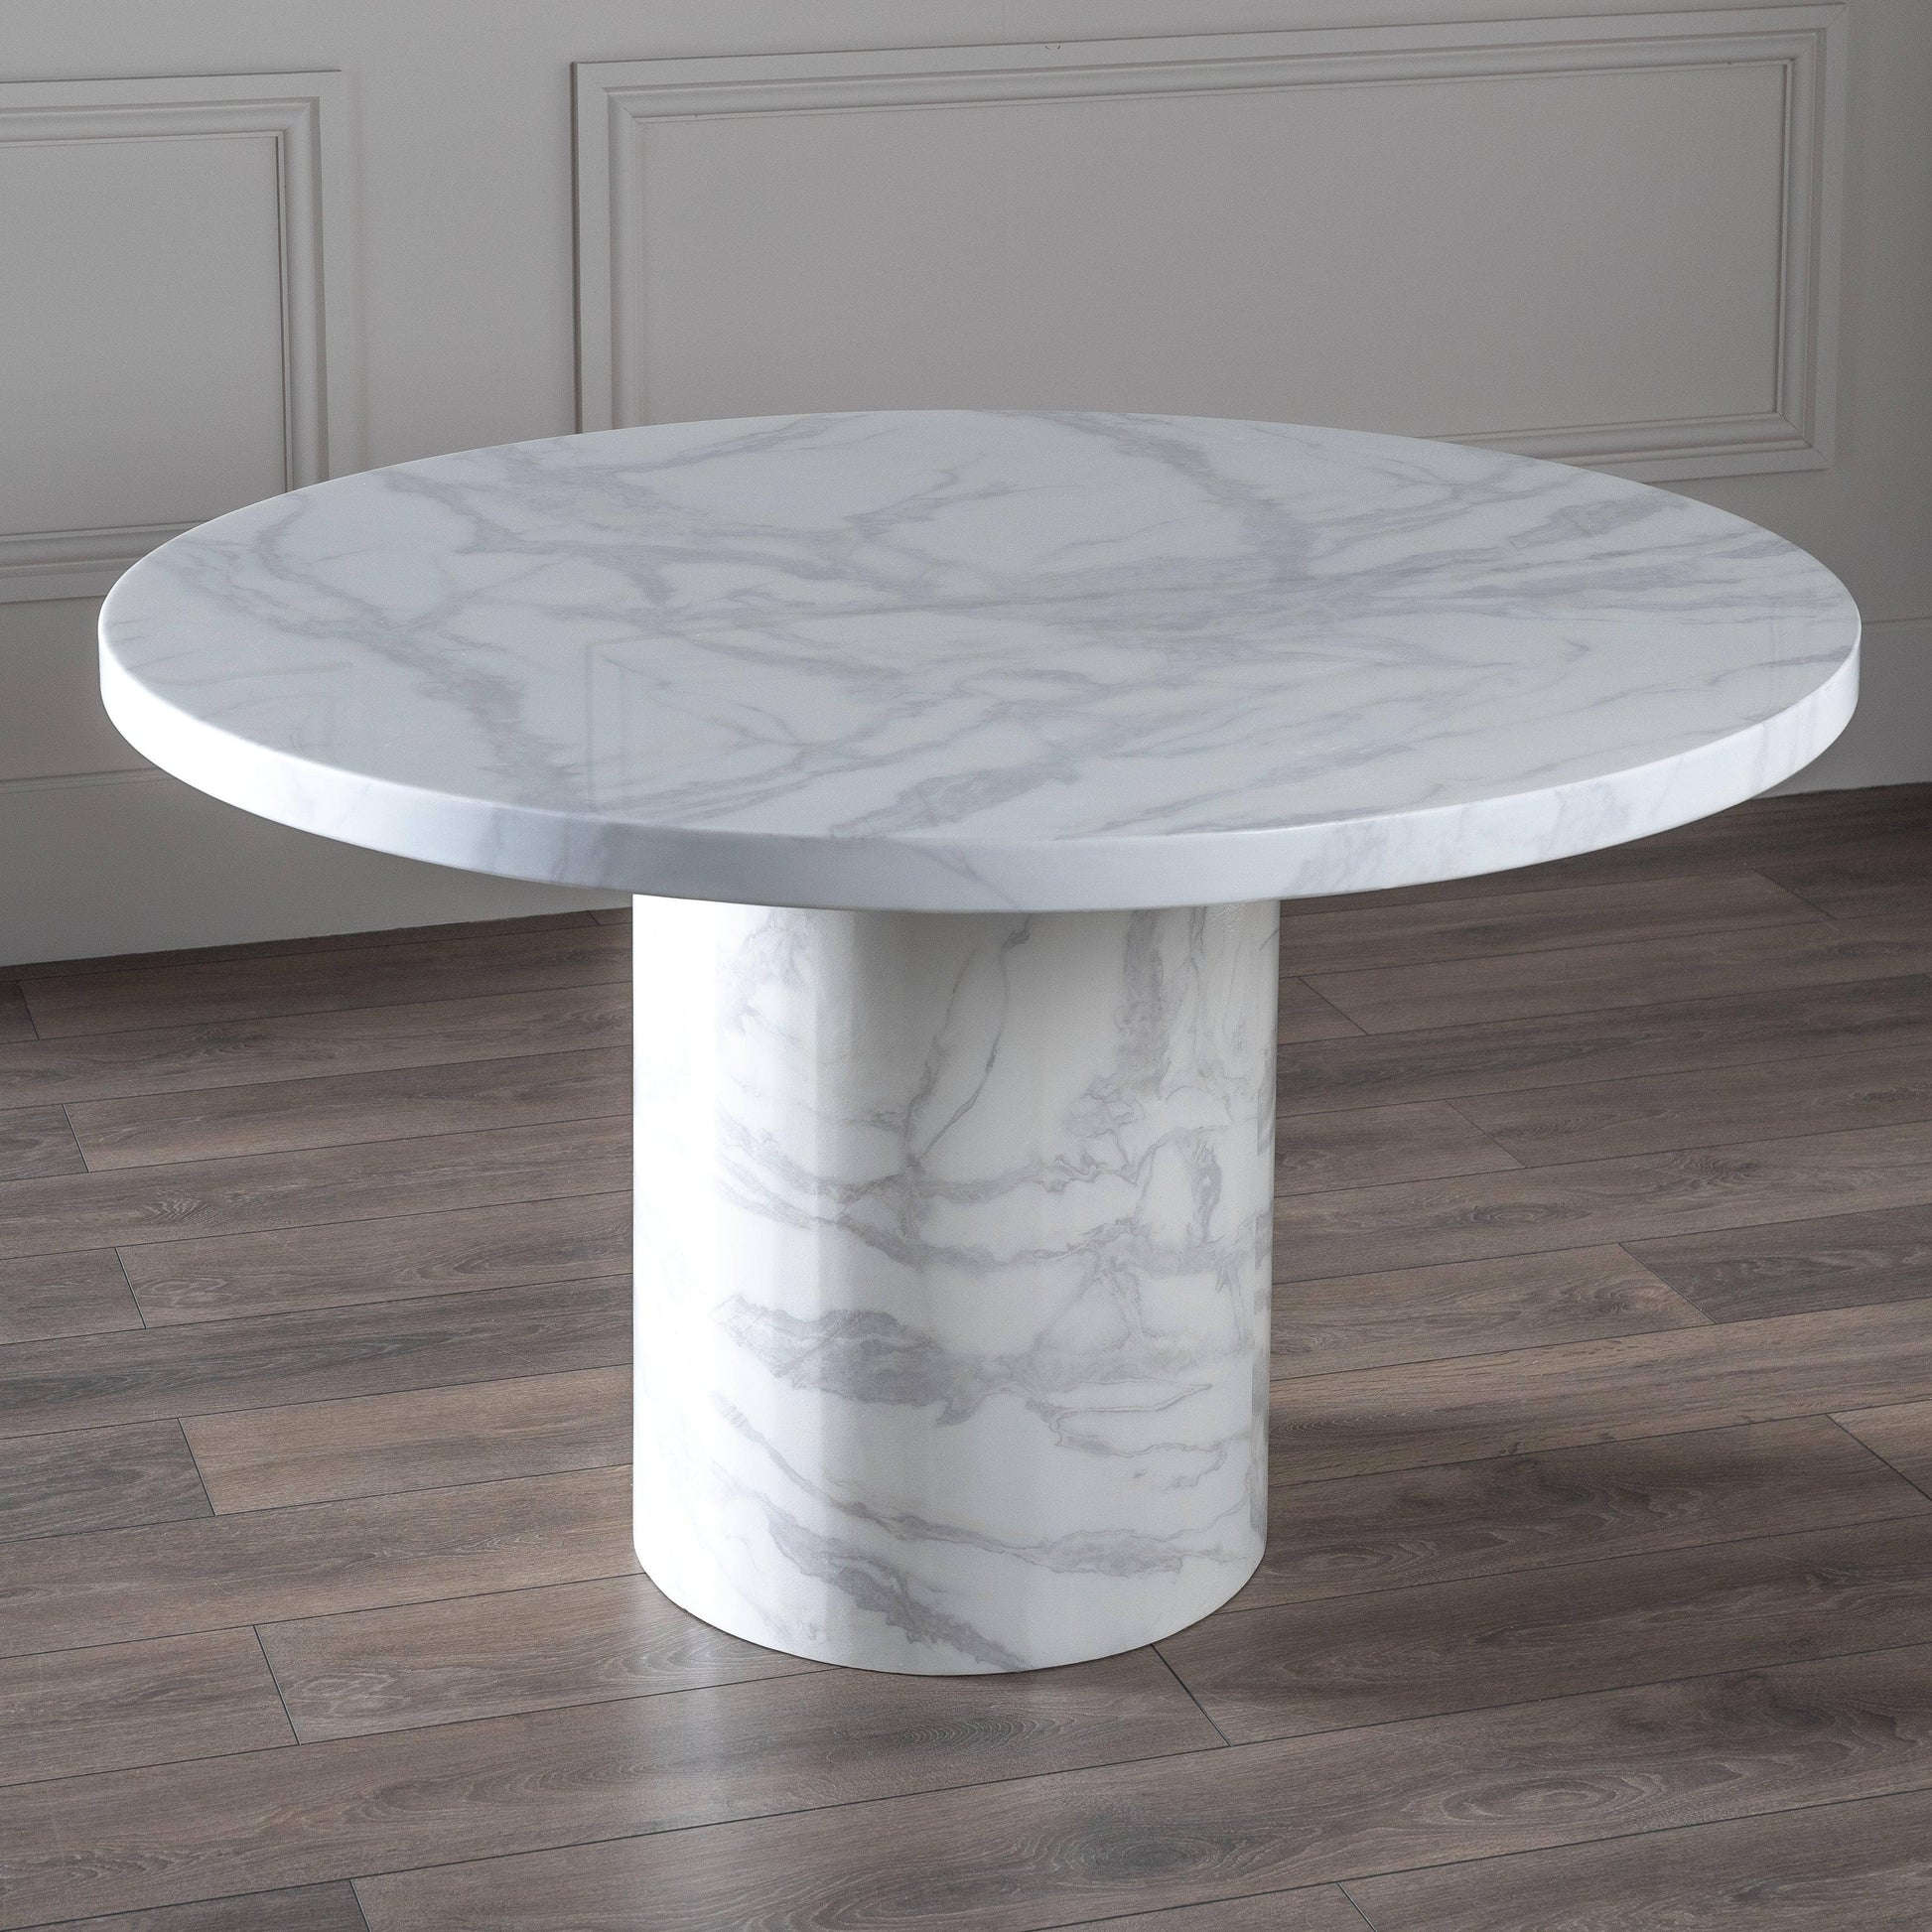 Furniture  -  Alto Dining Table  -  60003715